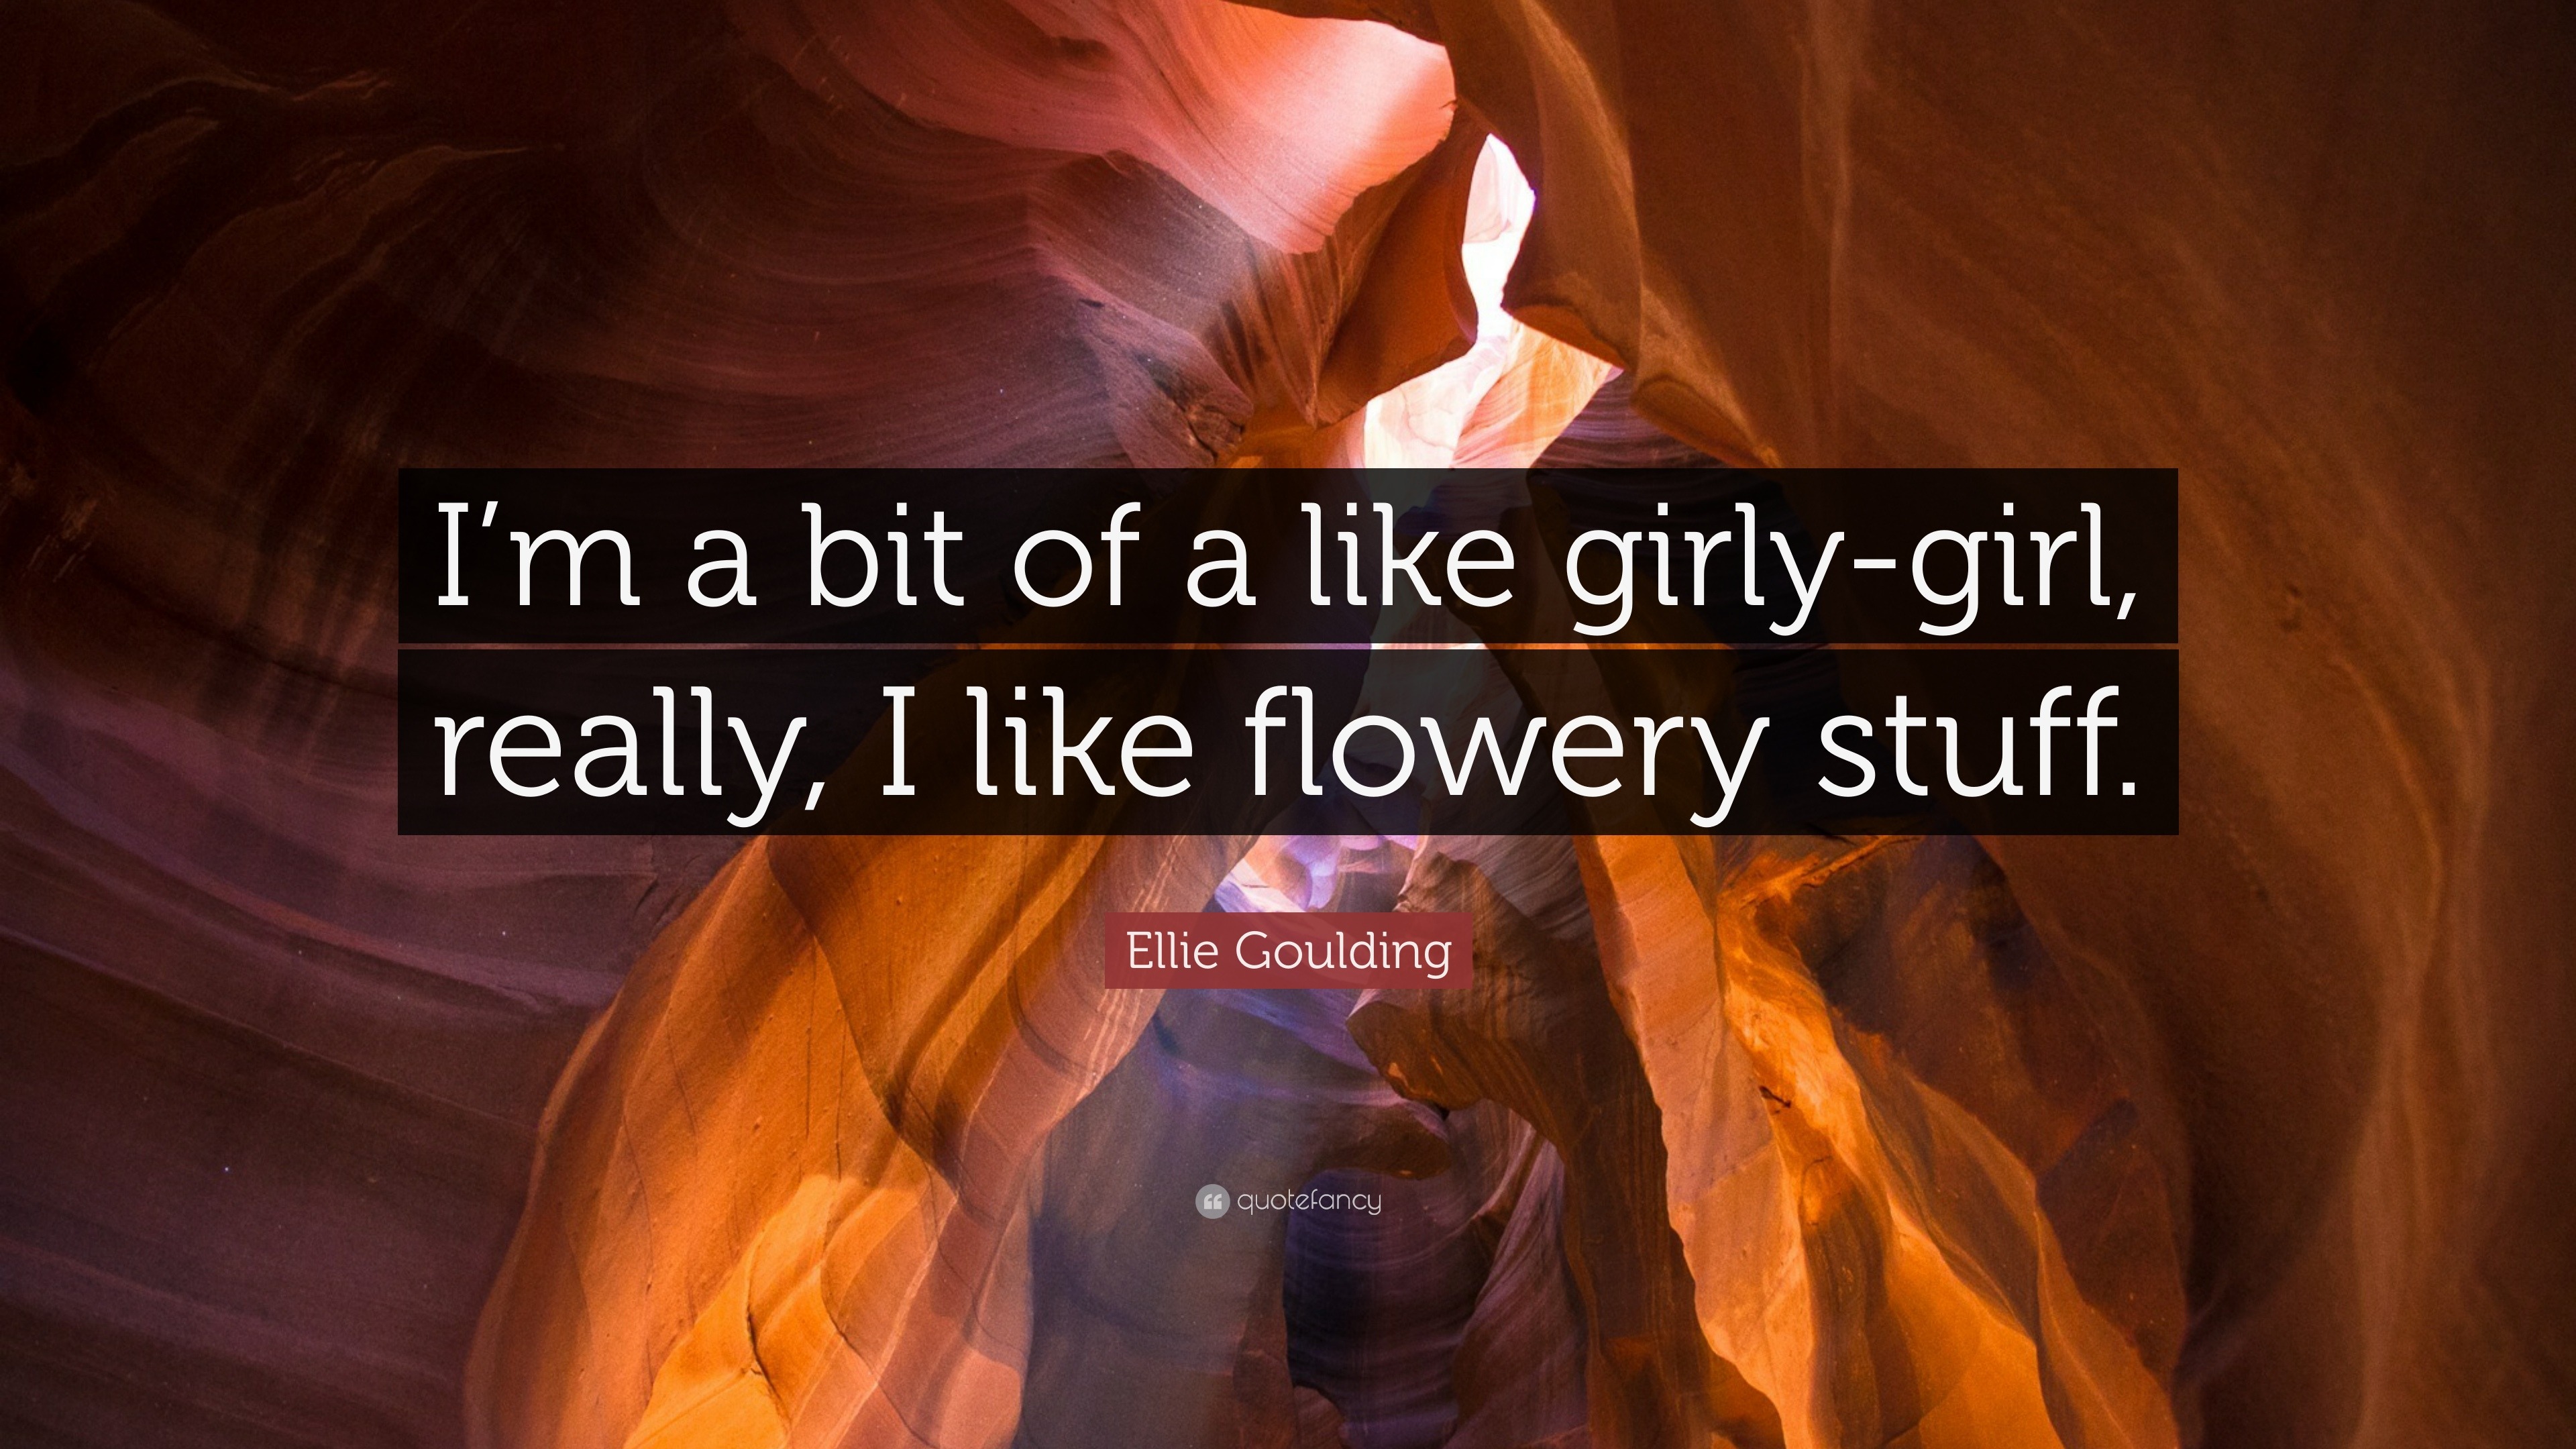 Ellie Goulding Quote: “I'm a bit of a like girly-girl, really, I like  flowery